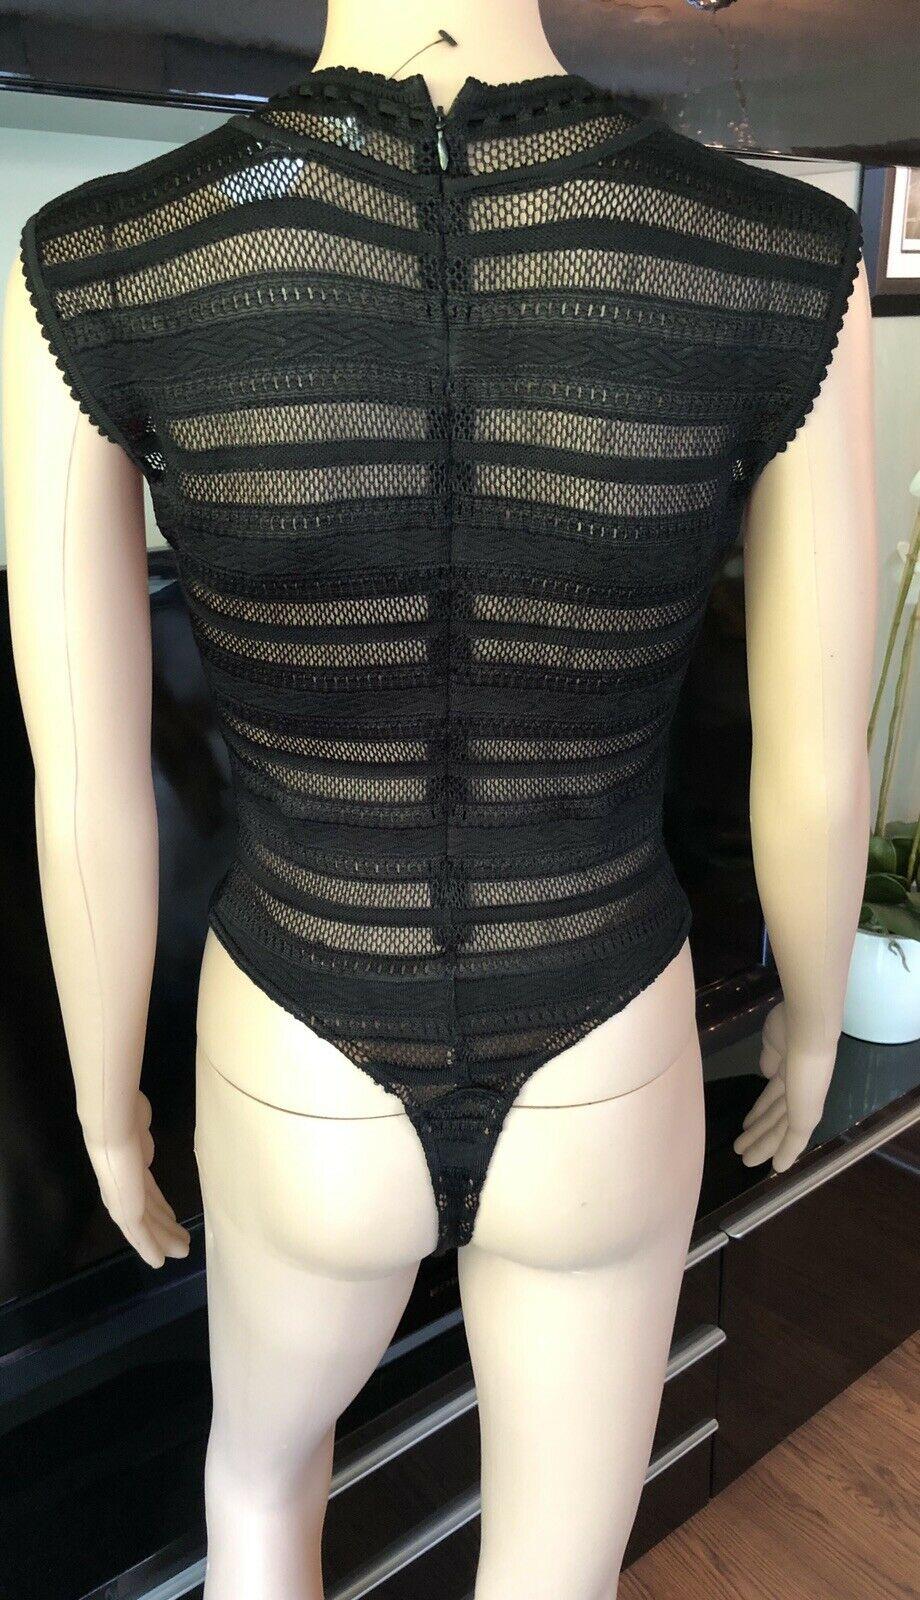 Azzedine Alaia Vintage Semi-Sheer Bodysuit Top

Black Alaïa scoop neck sleeveless bodysuit with eyelet pattern and zip closure at back.

All Eyes on Alaïa

For the last half-century, the world’s most fashionable and adventuresome women have turned